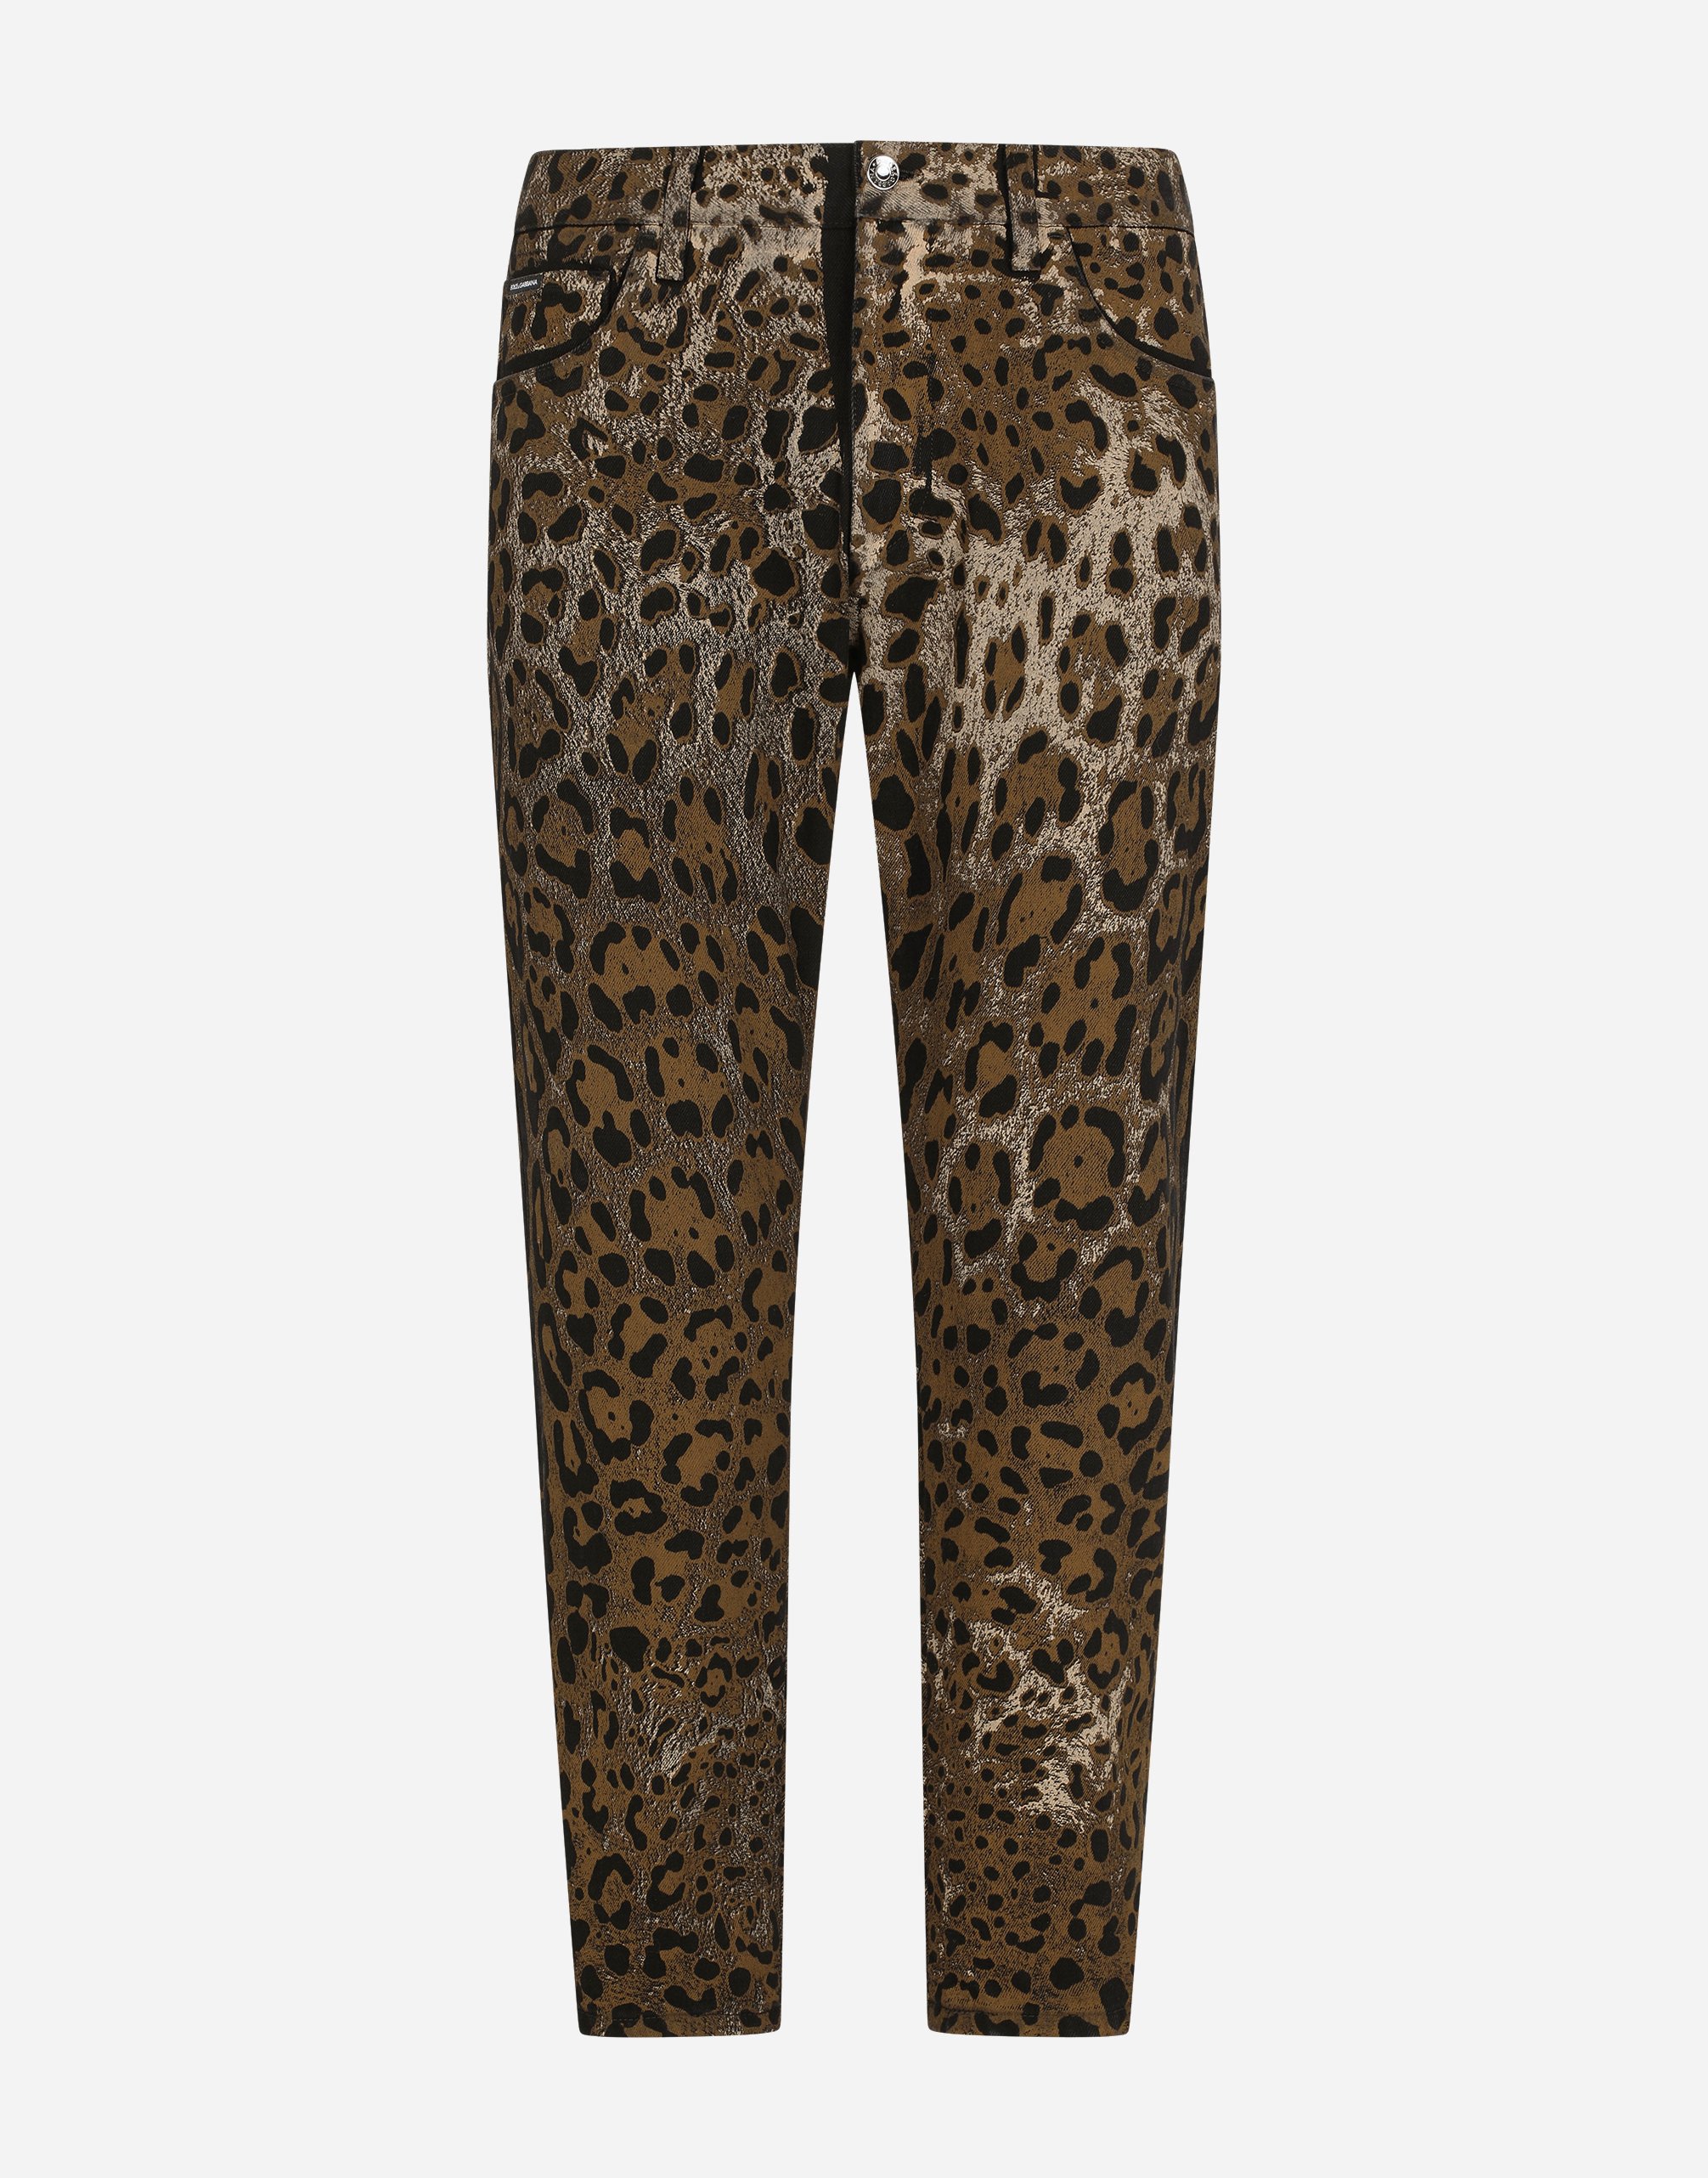 Loose jeans with DG leopard print in Multicolor